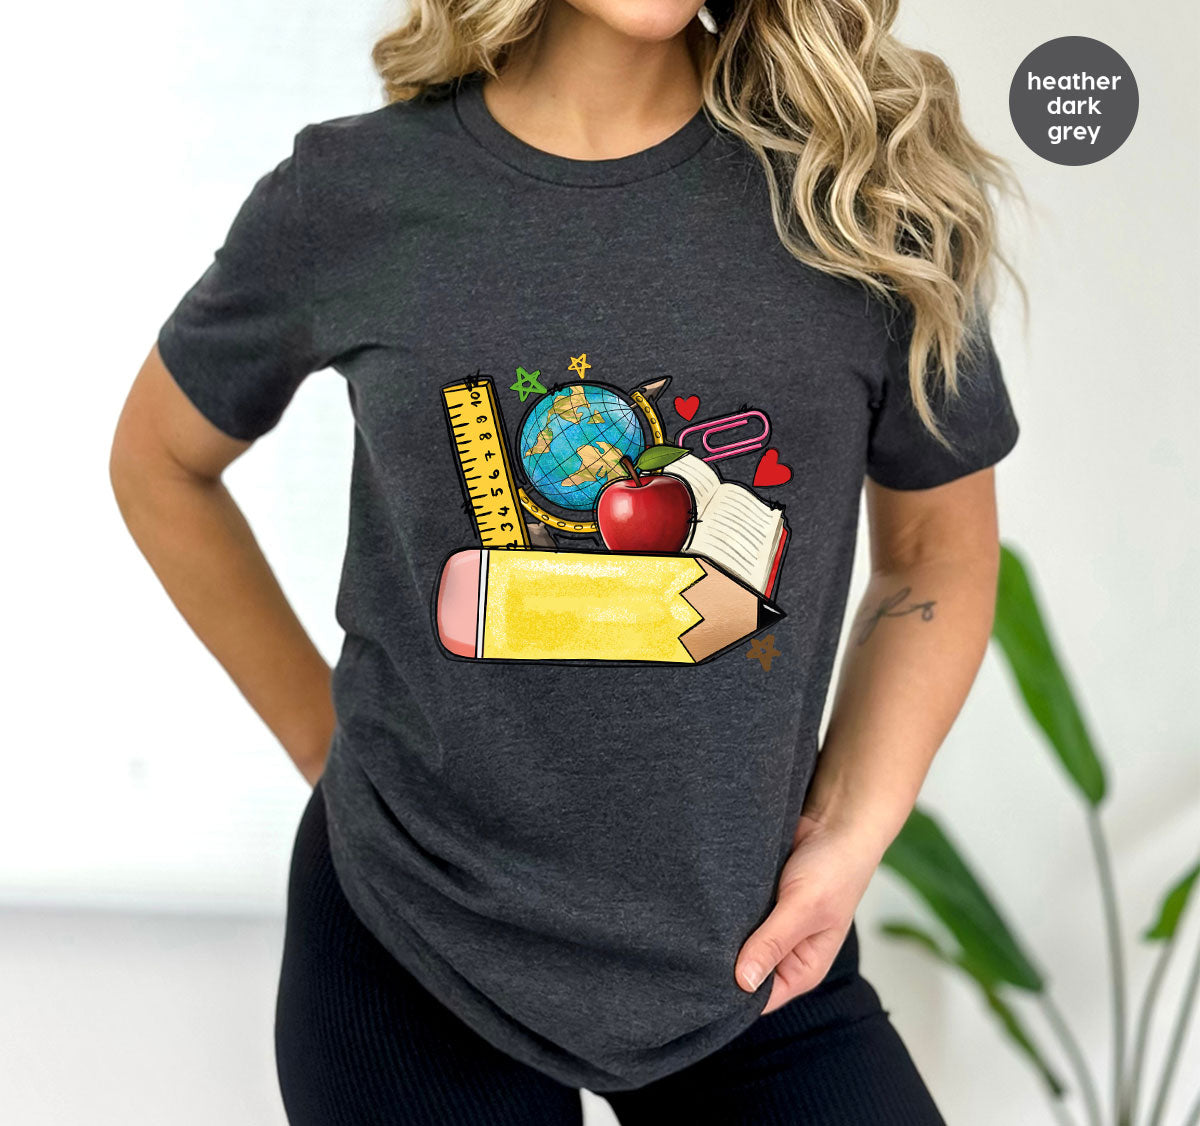 Funny Students Clothing, First Day of School Shirt, New Teacher Tshirt